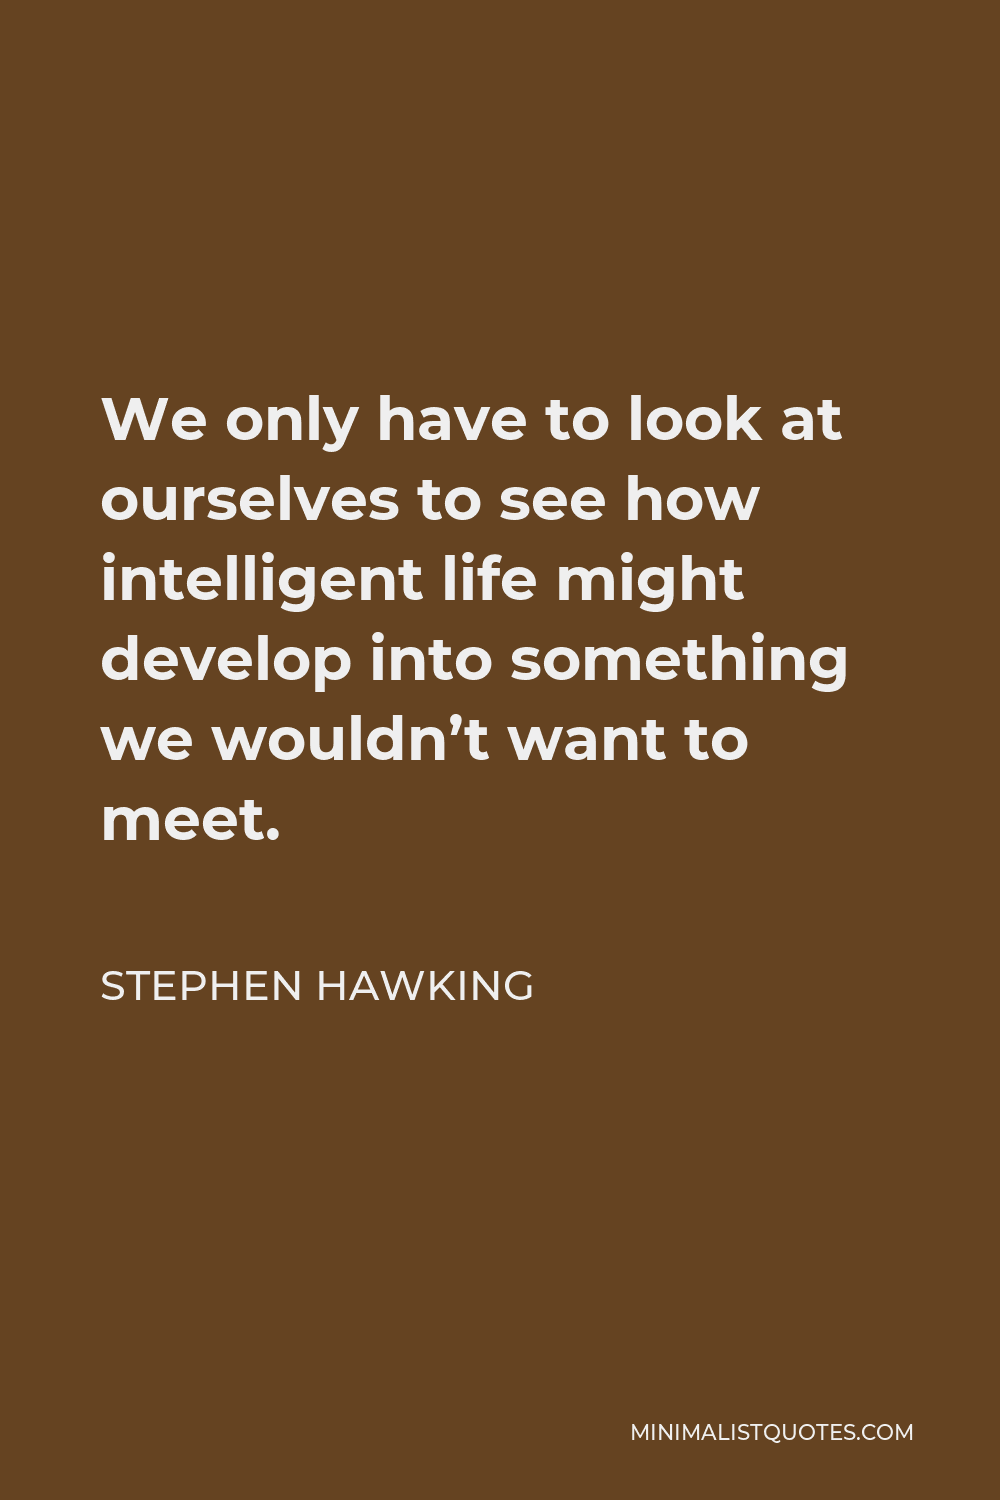 Stephen Hawking Quote - We only have to look at ourselves to see how intelligent life might develop into something we wouldn’t want to meet.